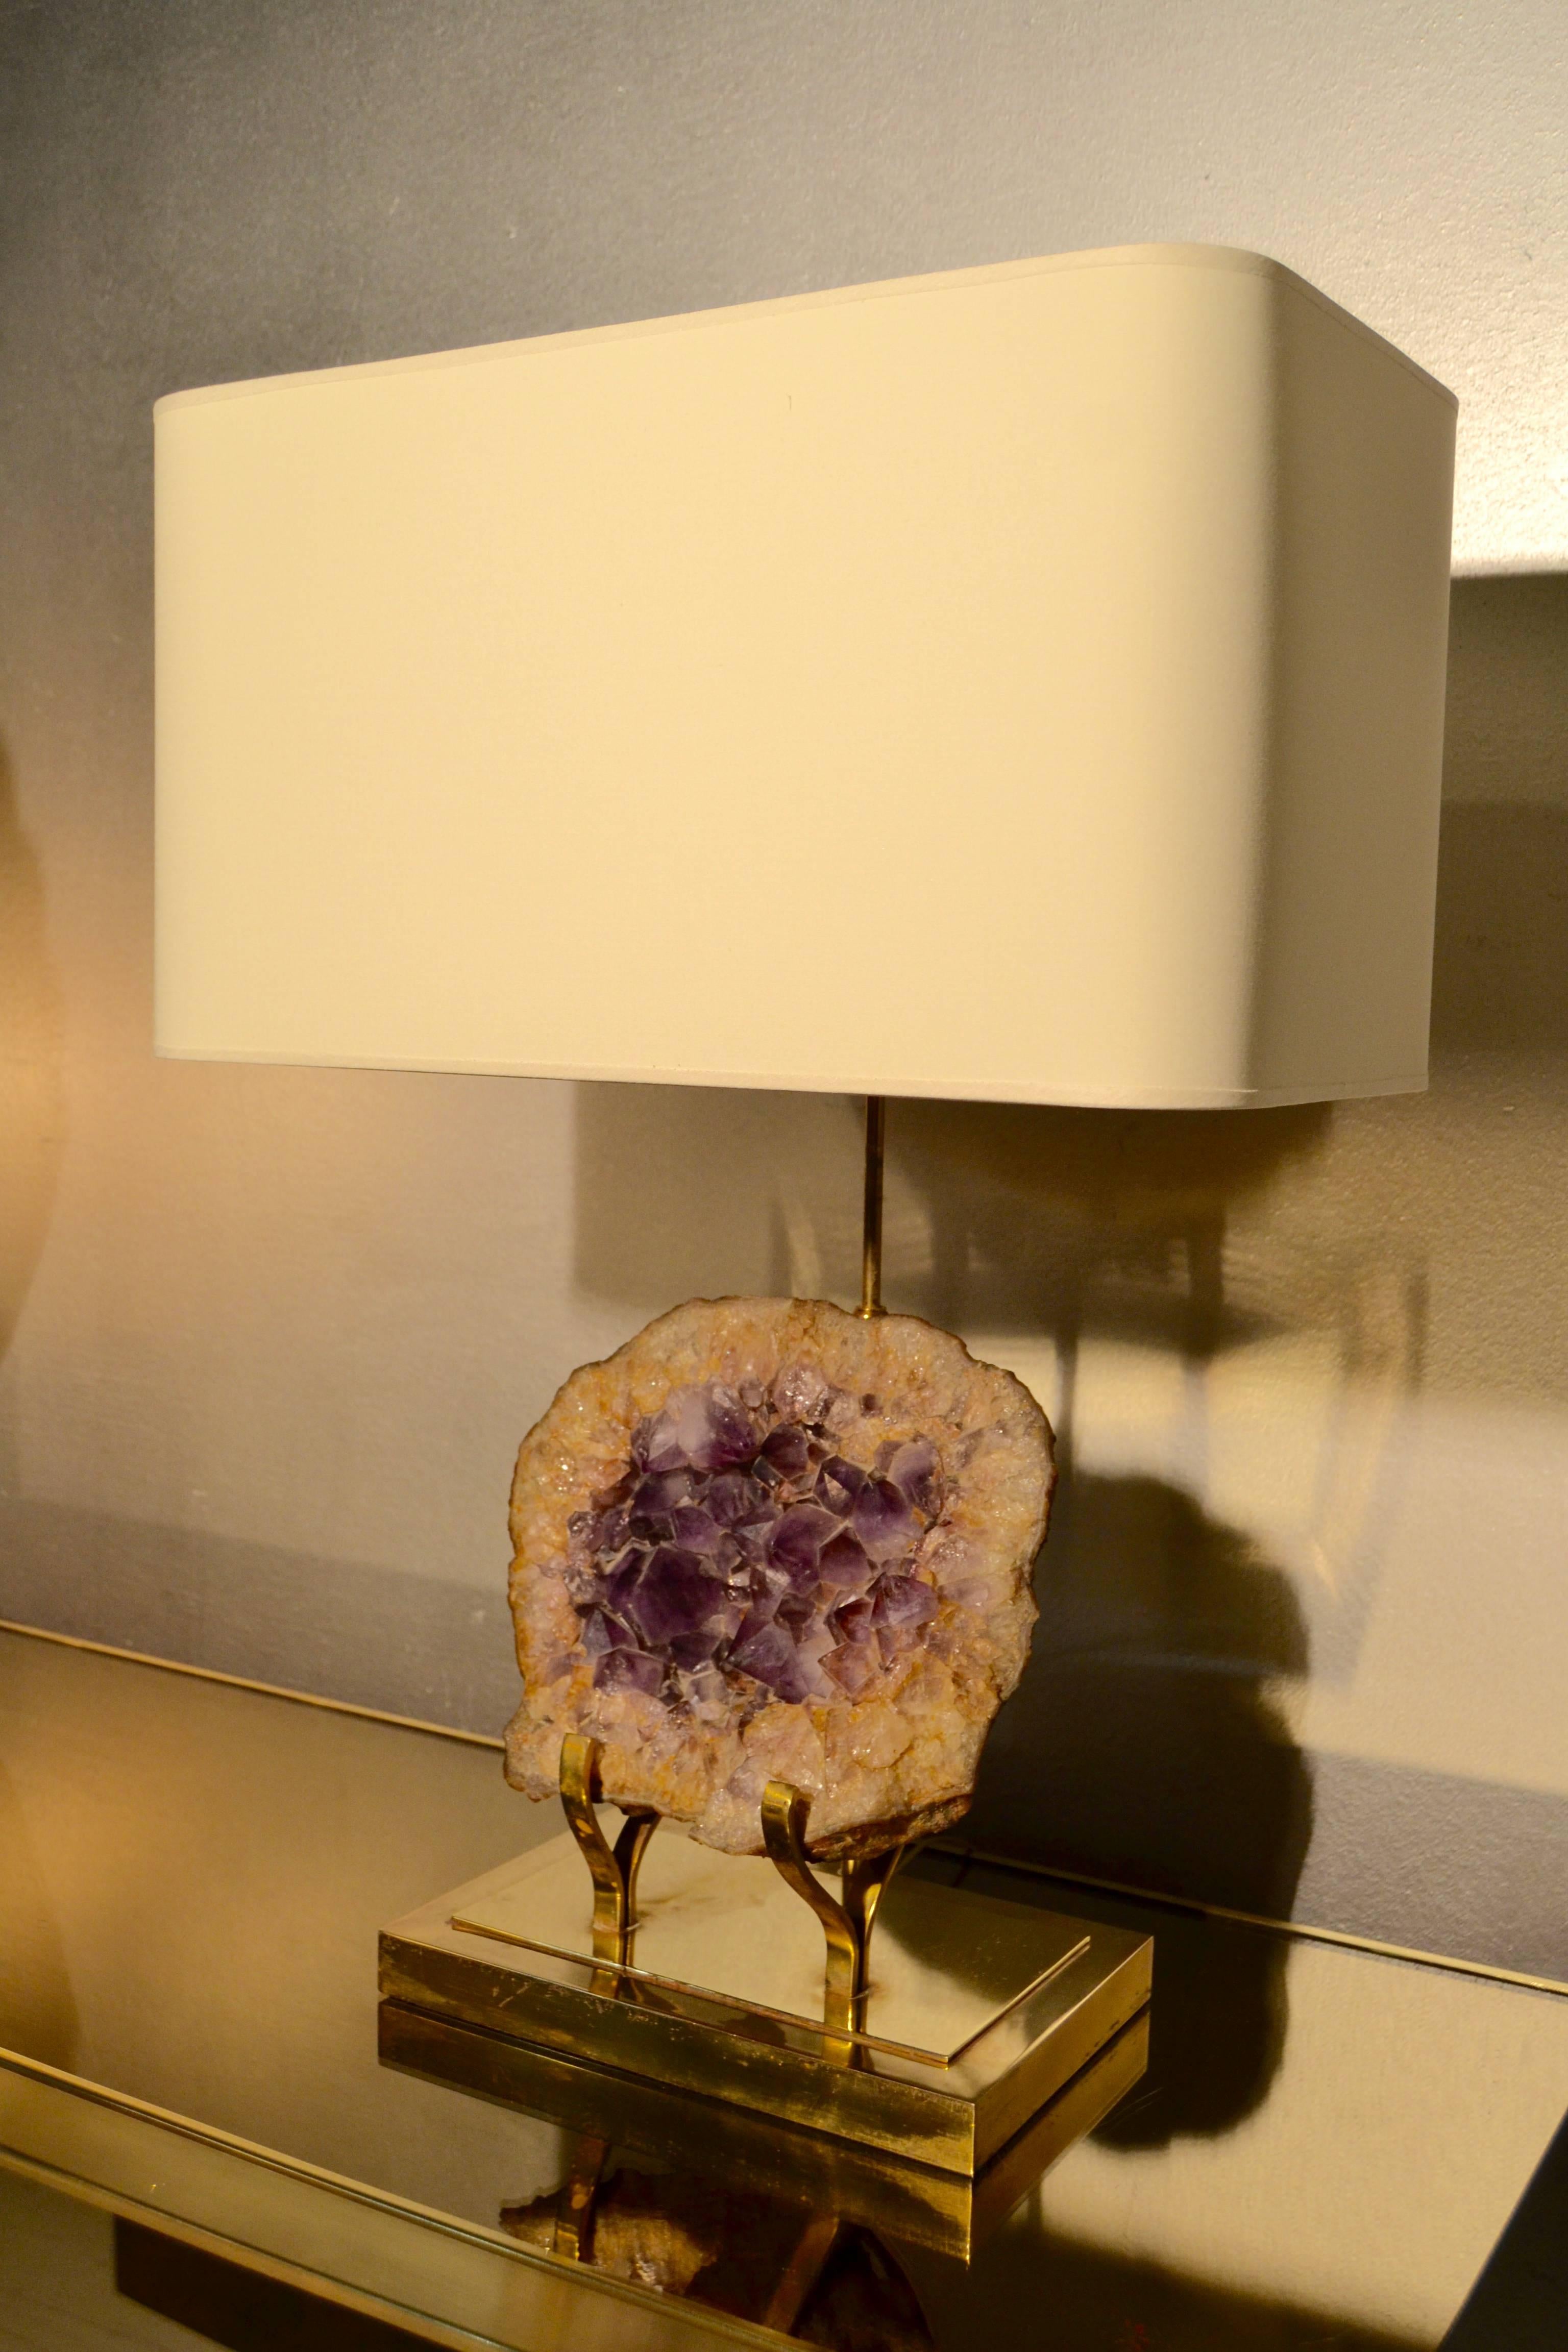 1970s amethyst and brass table lamp in the manner of Willy Daro.
Great condition.
Lamp has been rewired.
New shade with gold interior. Shade is adjustable on height.